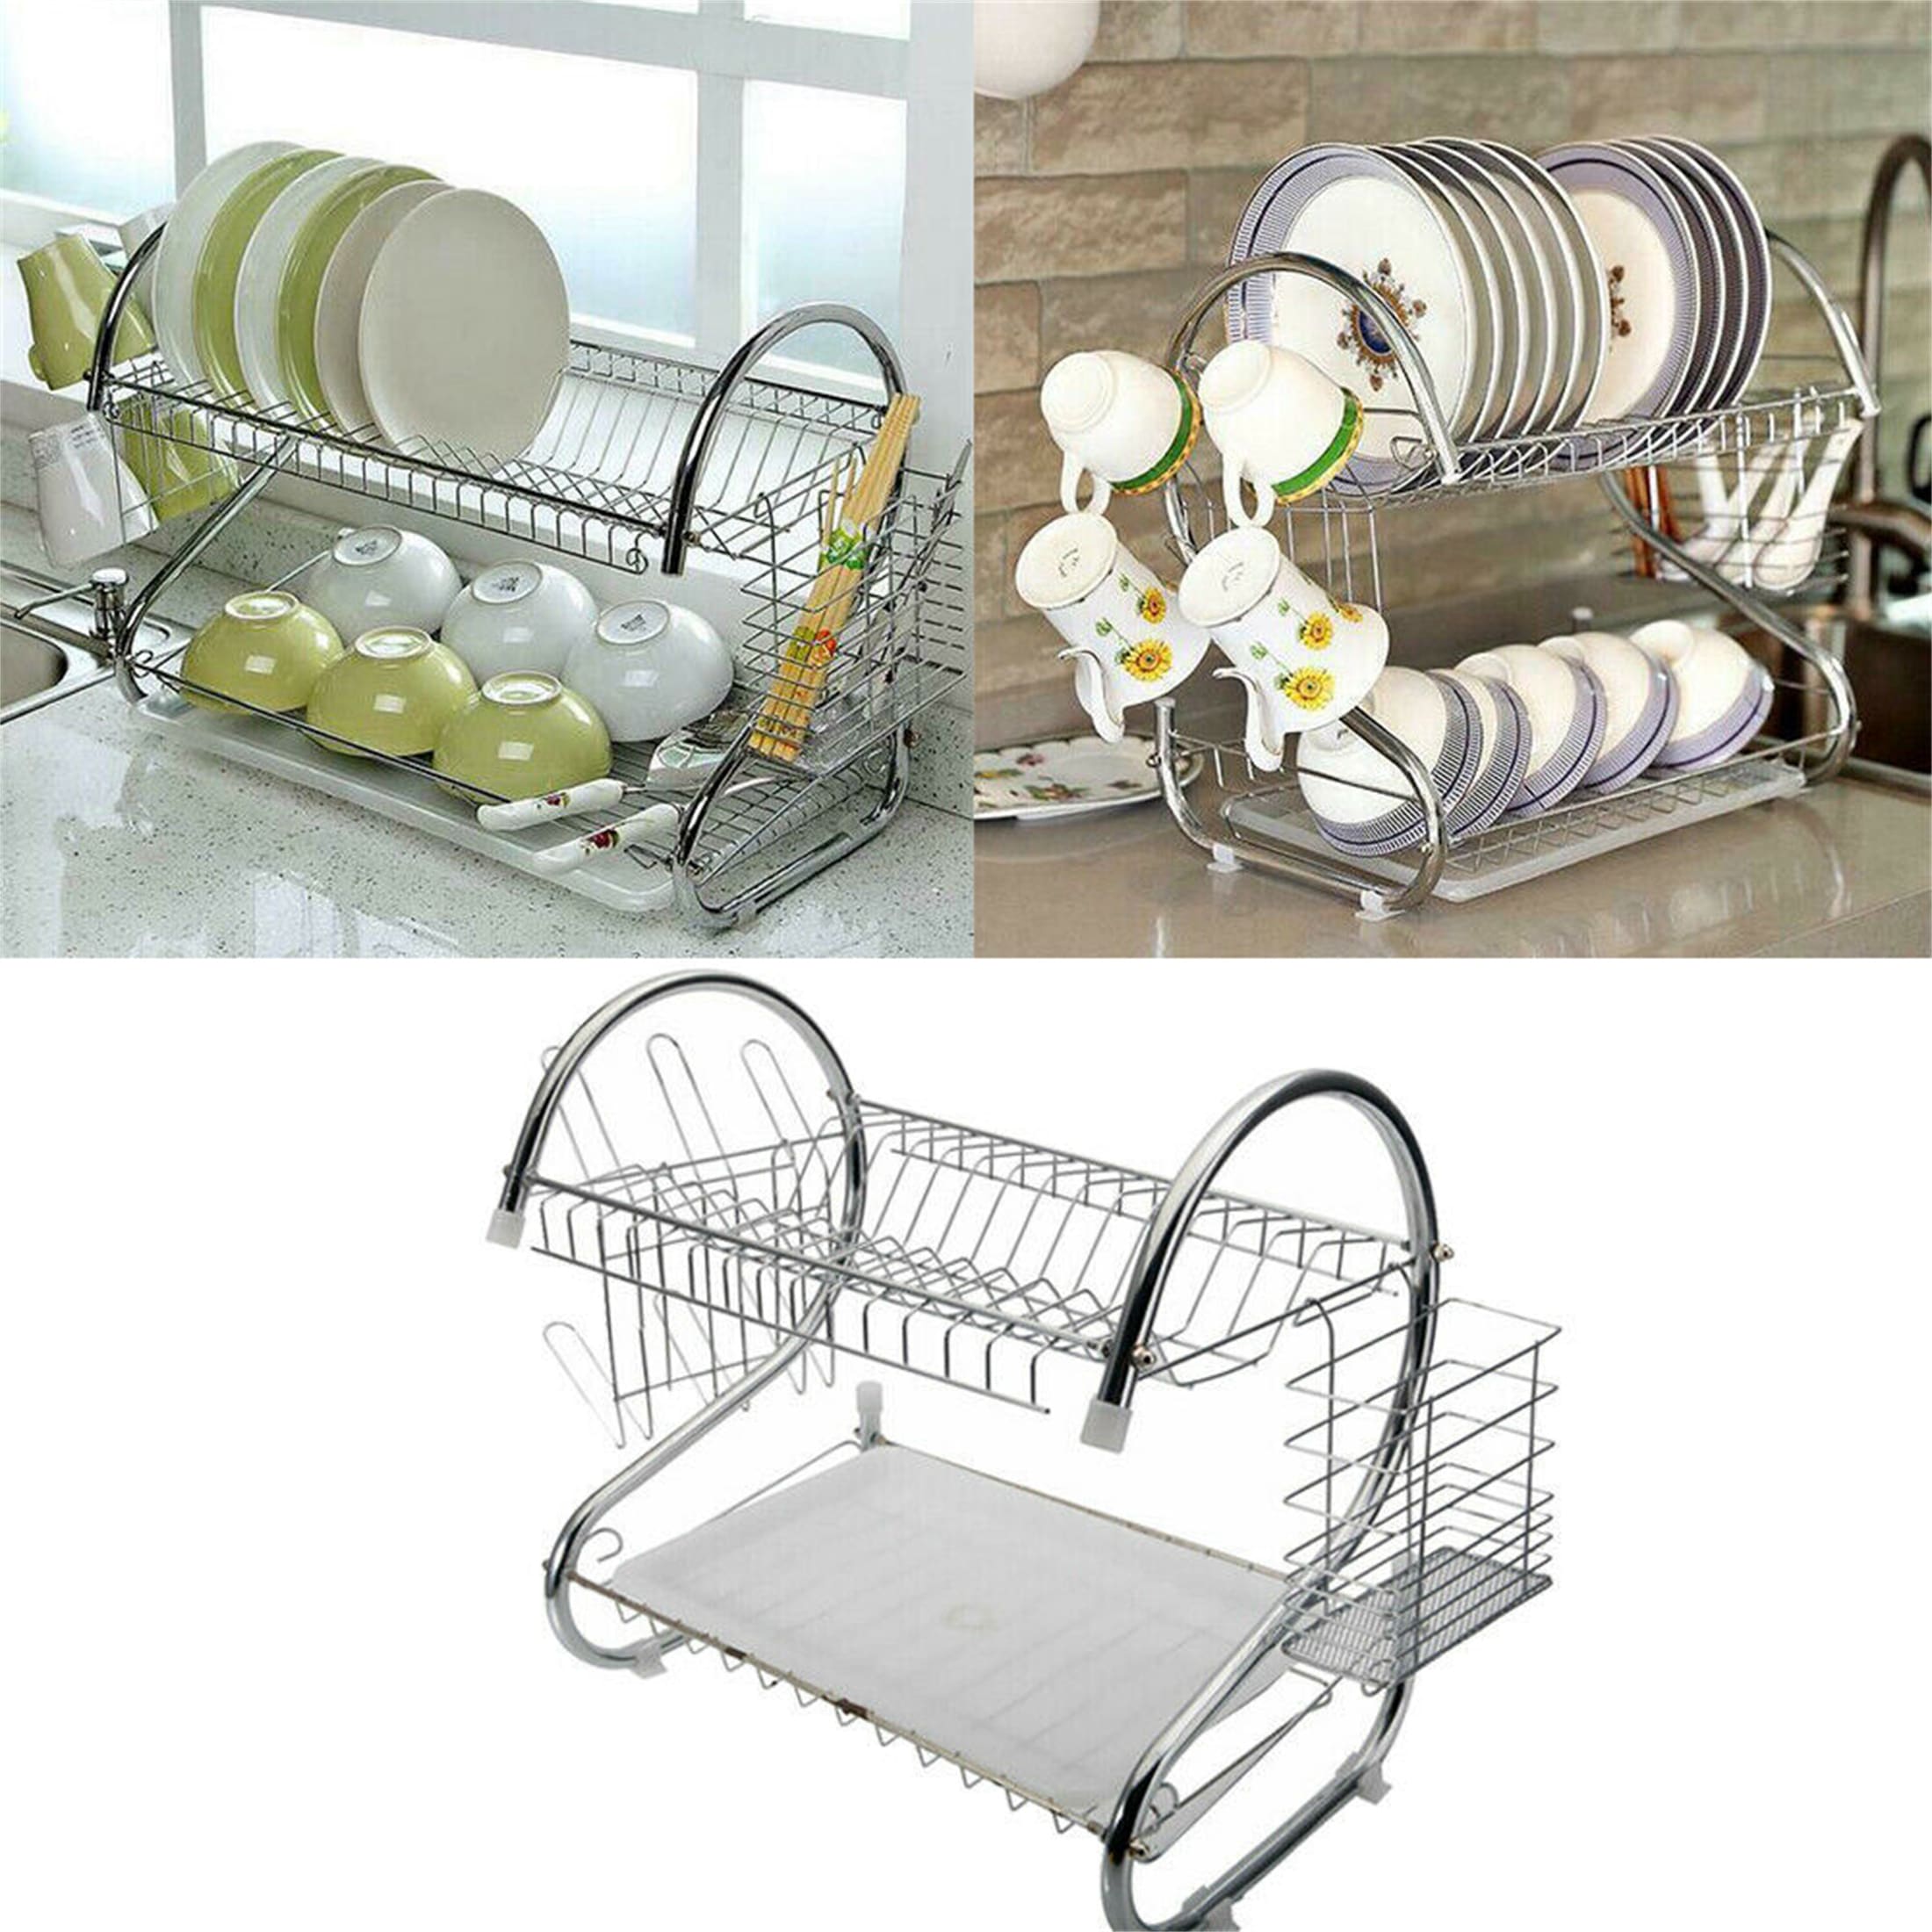 Aluminum Dish Rack with Cutlery Holder Removable Drainer Tray, Silver 